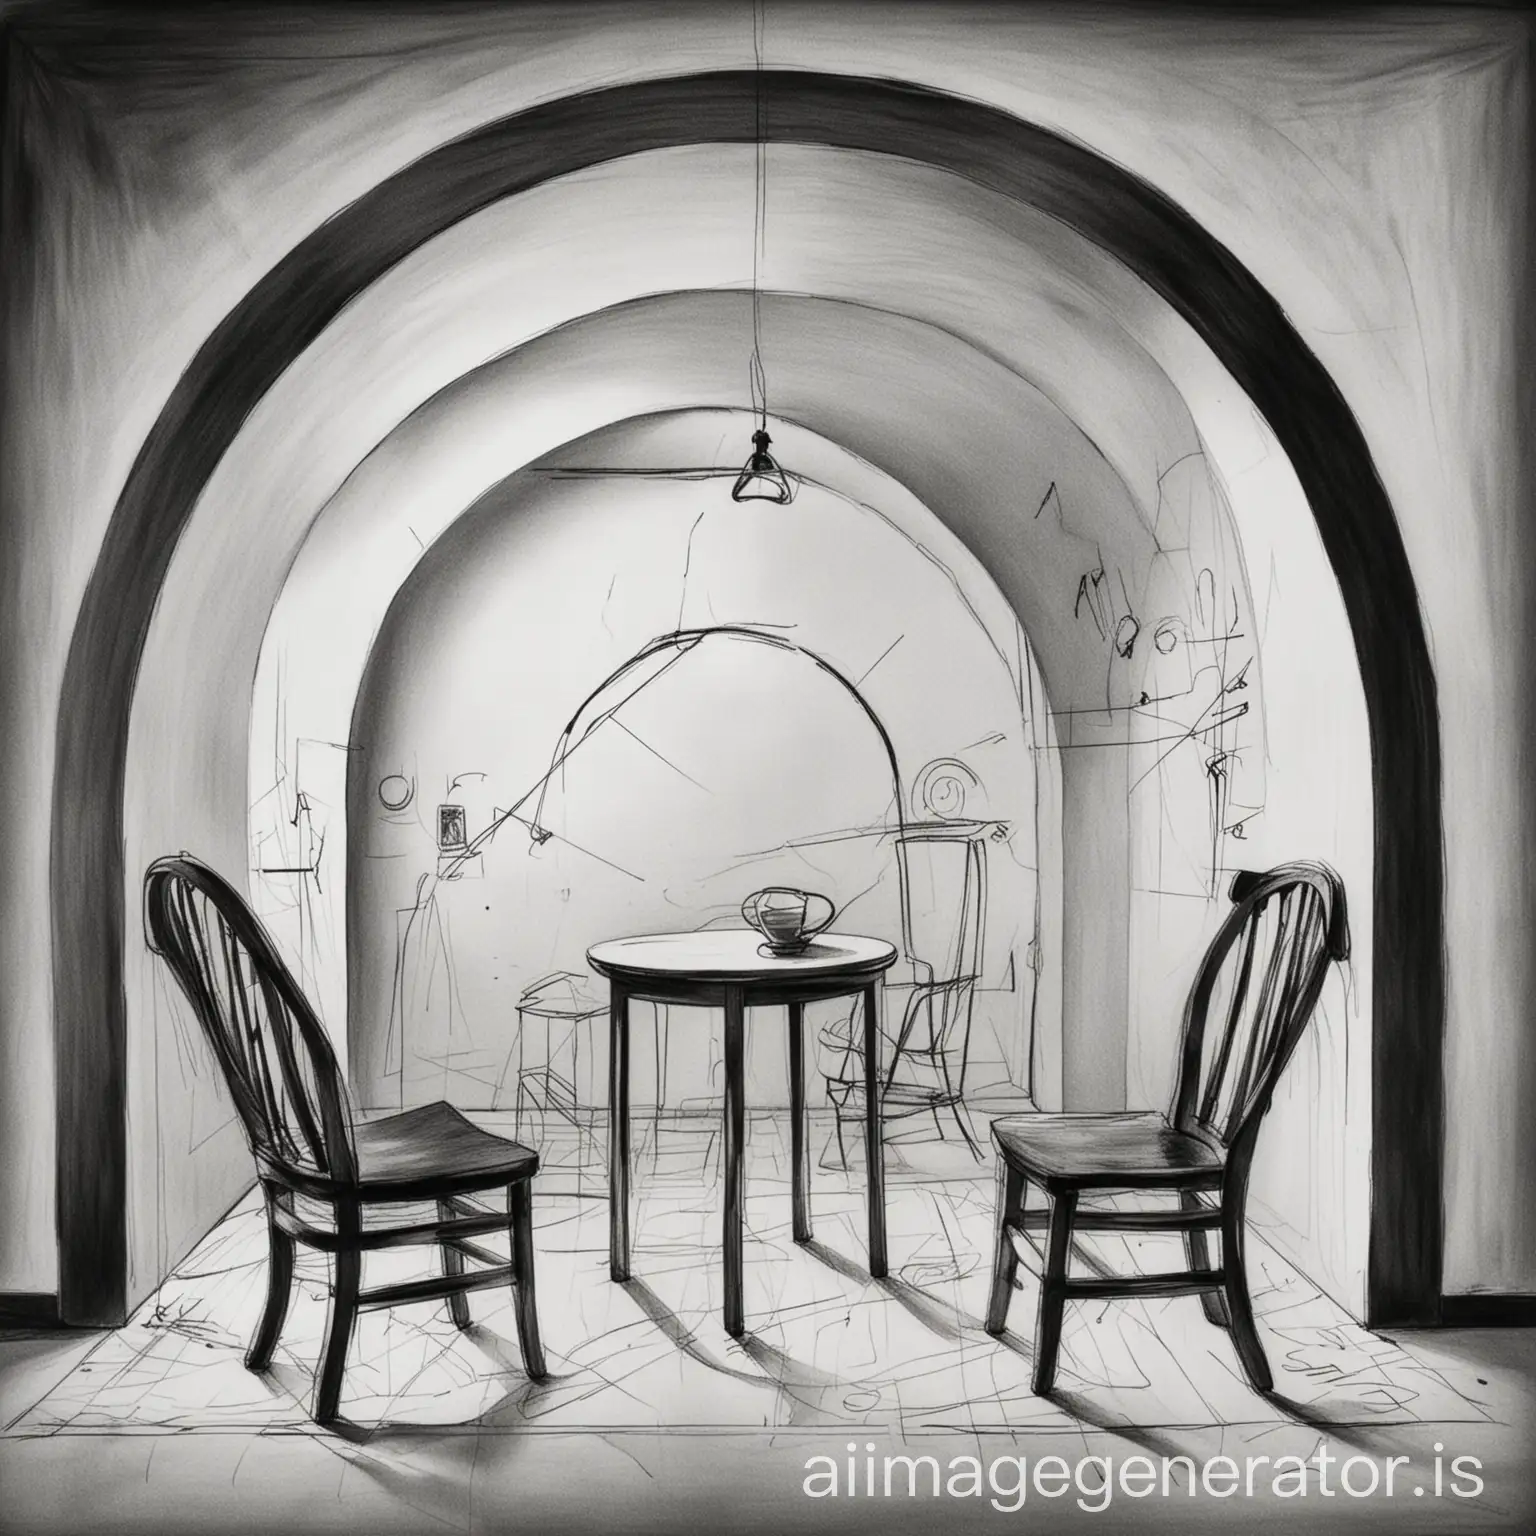 hand-drawn black and white sketch of an arch-shaped space, 2 chairs, a work of art by Kandinsky